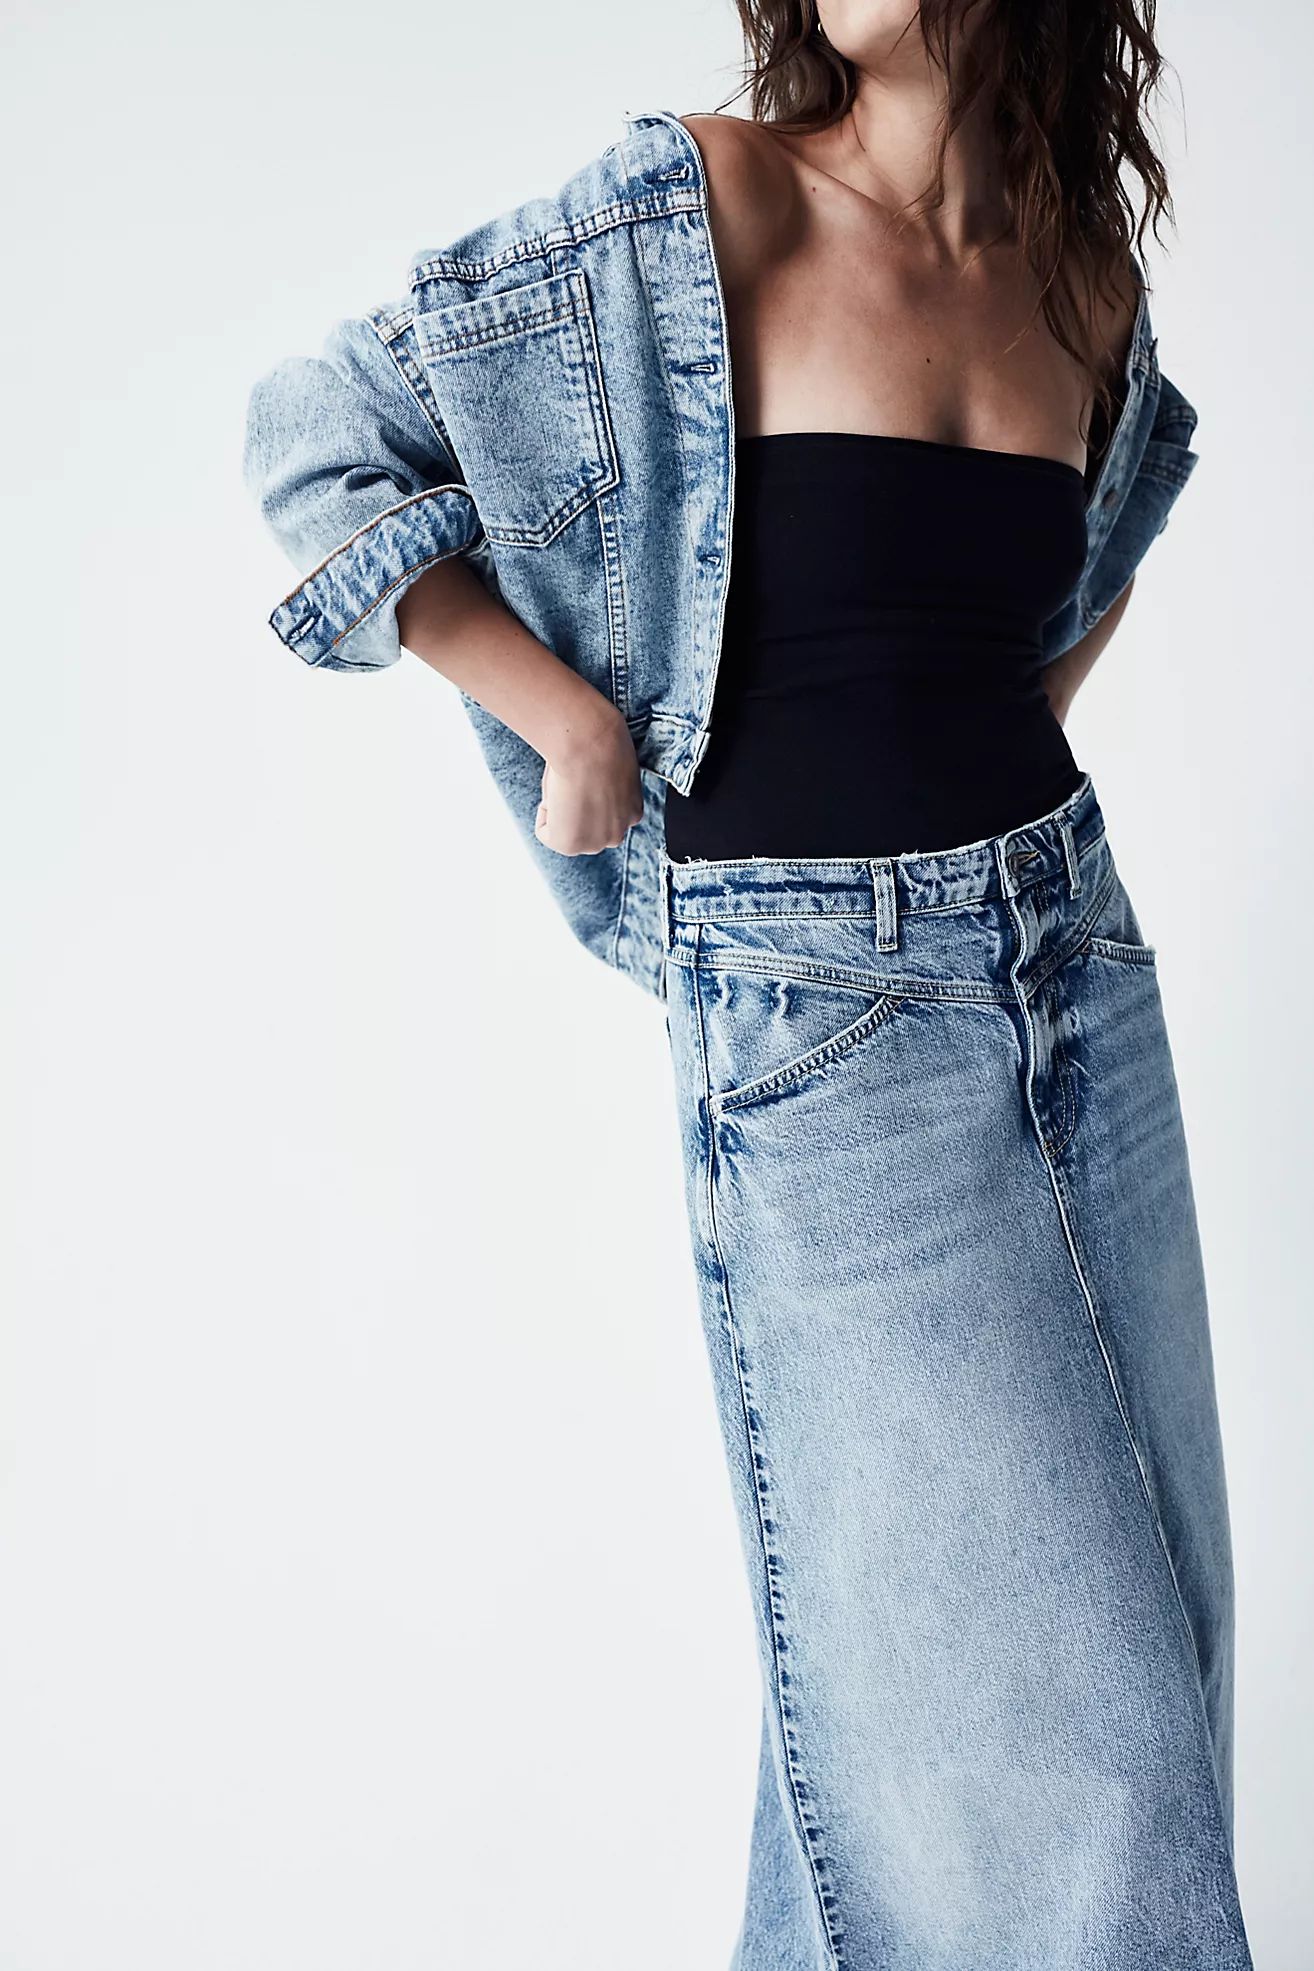 Come As You Are Denim Maxi Skirt | Free People (UK)